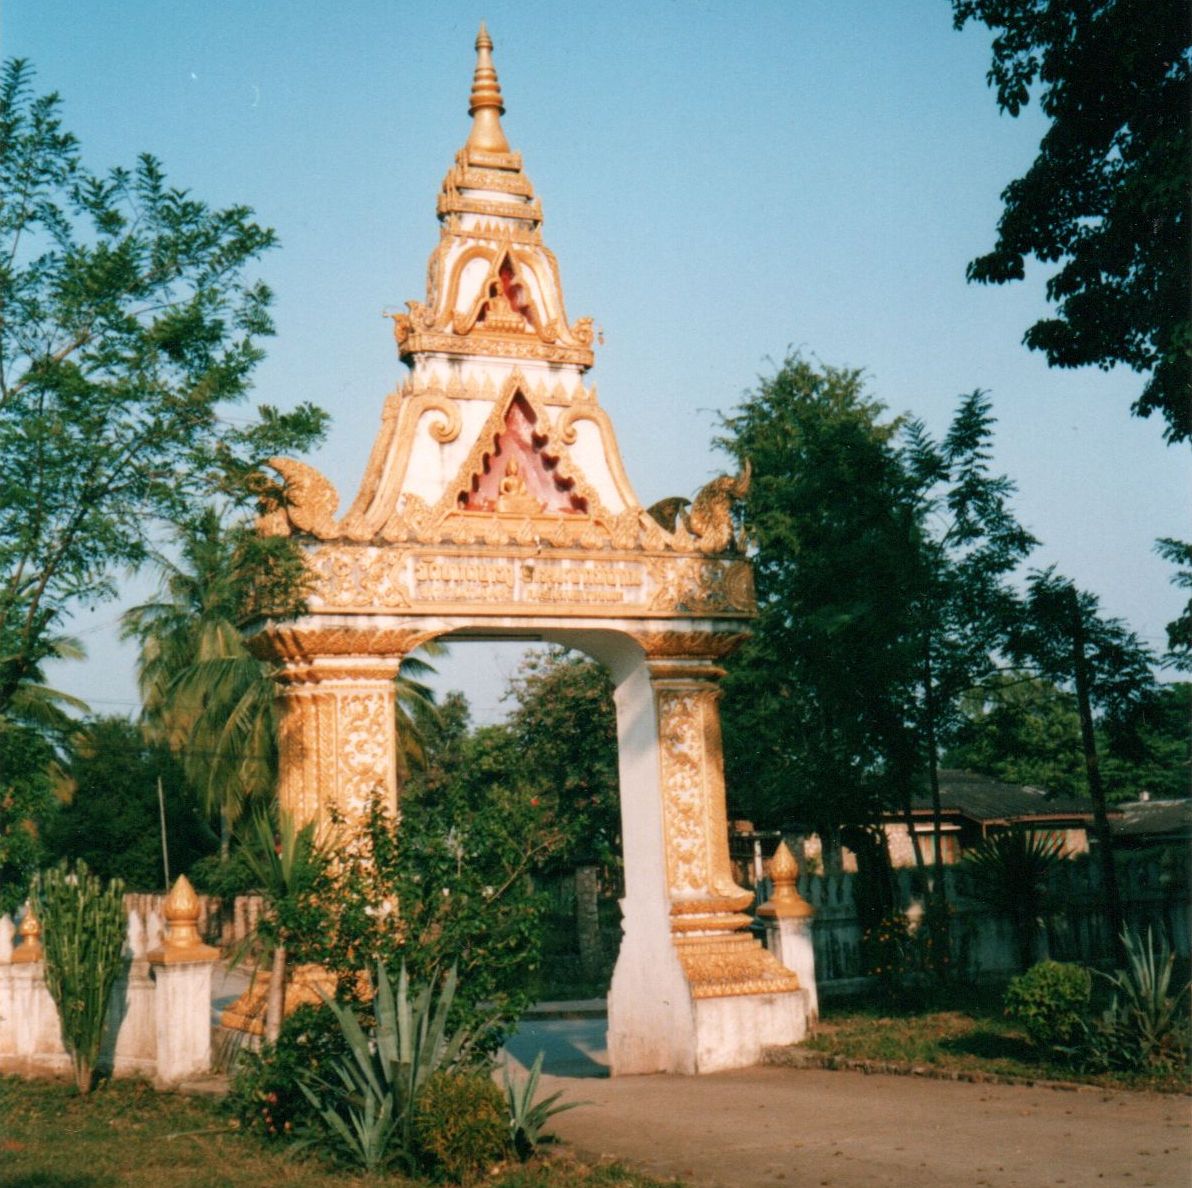 Entrance archway to Wat in Luang Prabang